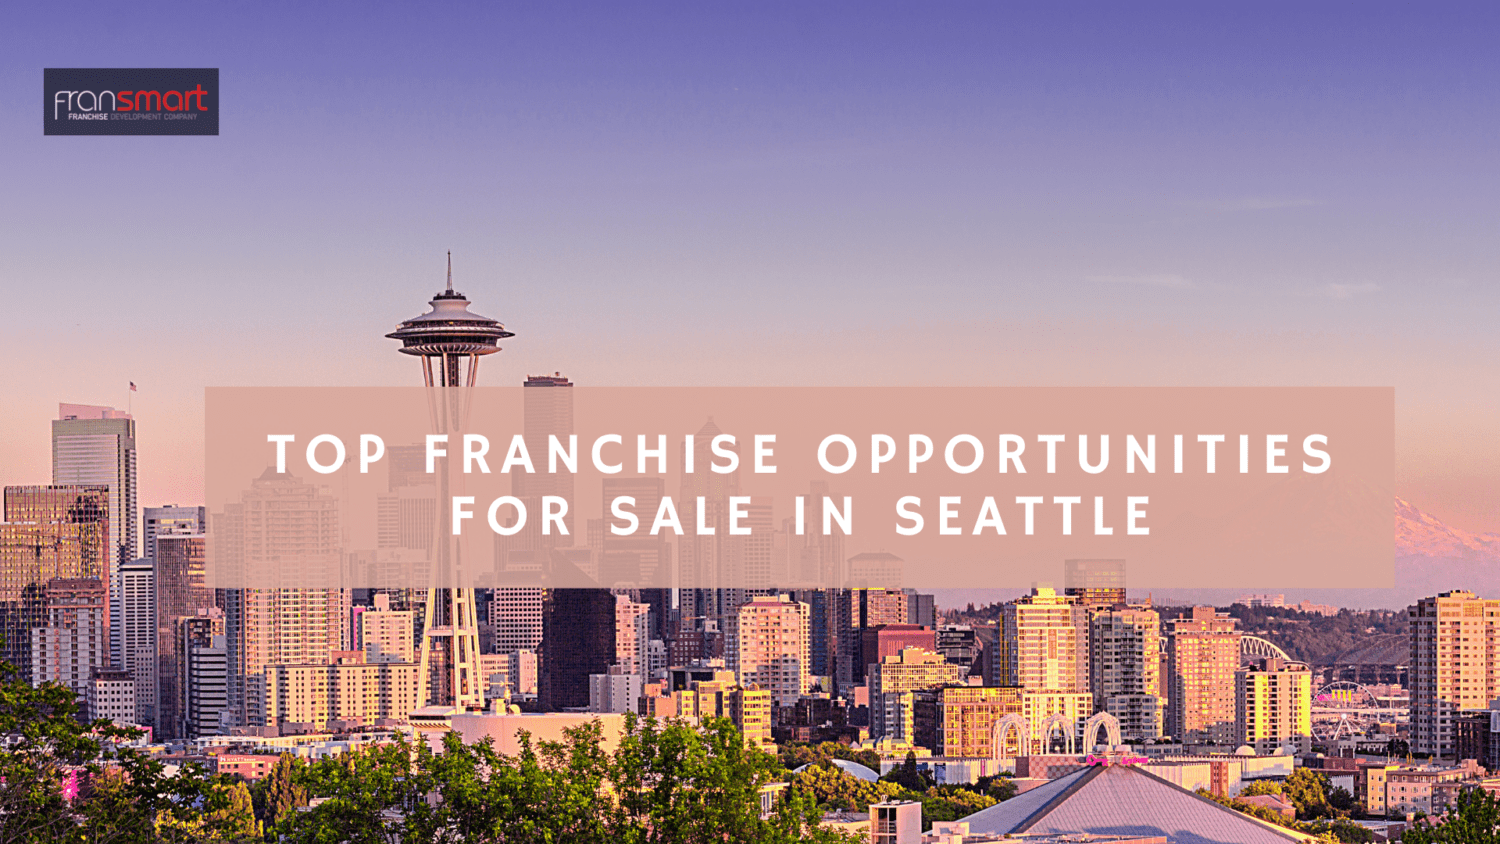 Top Franchise Opportunities for Sale in Seattle